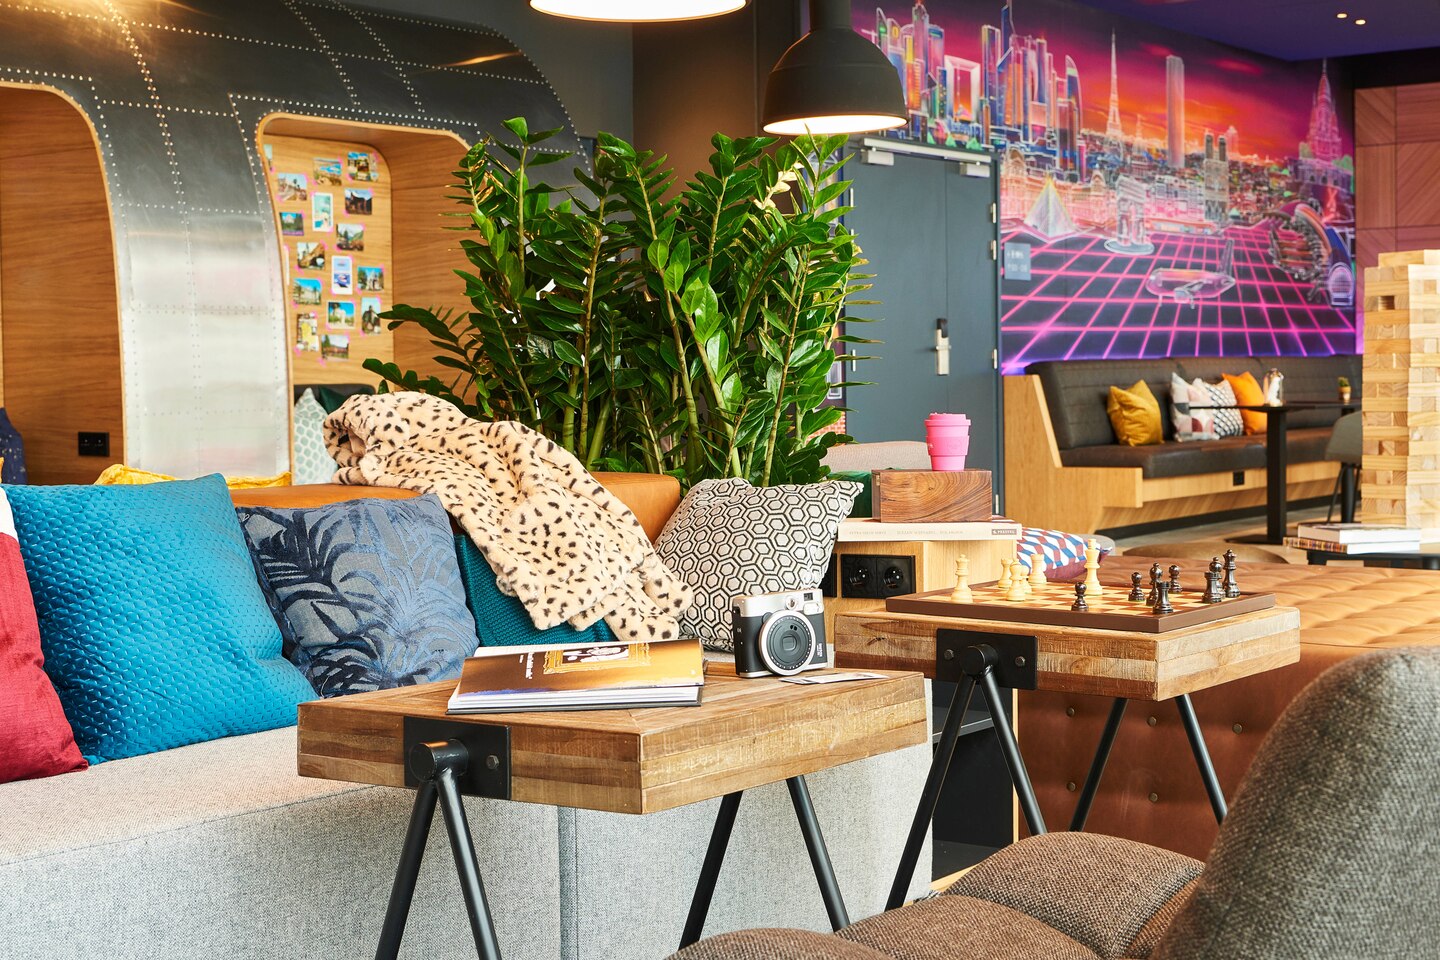 Business tourist? 4 good reasons to stay at Moxy Paris CDG Airport